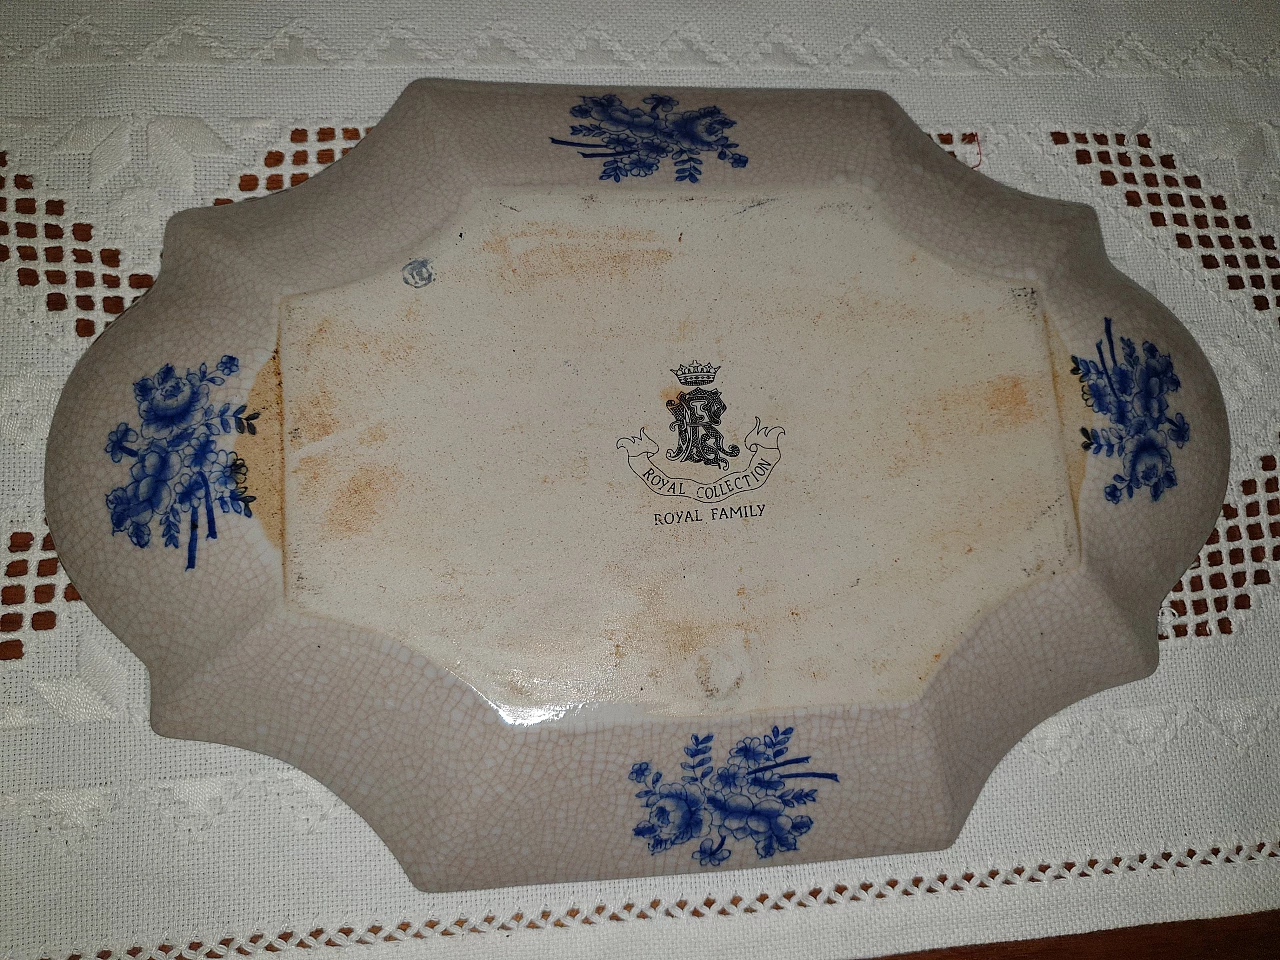 Antiqued ceramic tray by Royal Family, 1970s 2